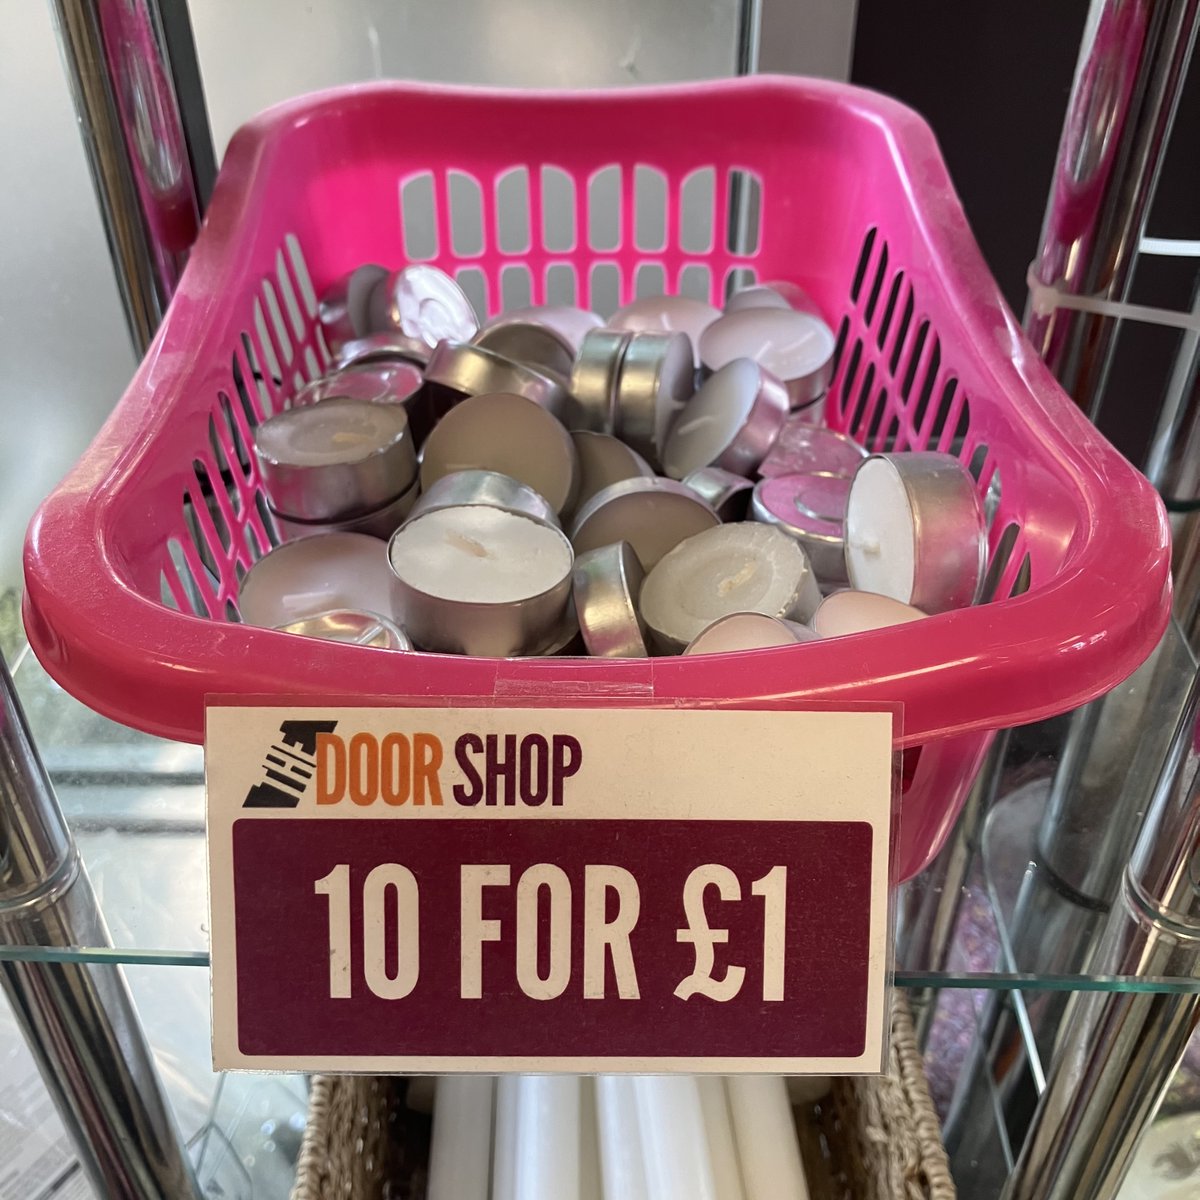 Long evenings in the garden enjoying the summer nights? Top up your tealights - 10 for £1 from The Door Shop at the top of the high street in #Stroud #ShopLocal #CharityShop #Summer